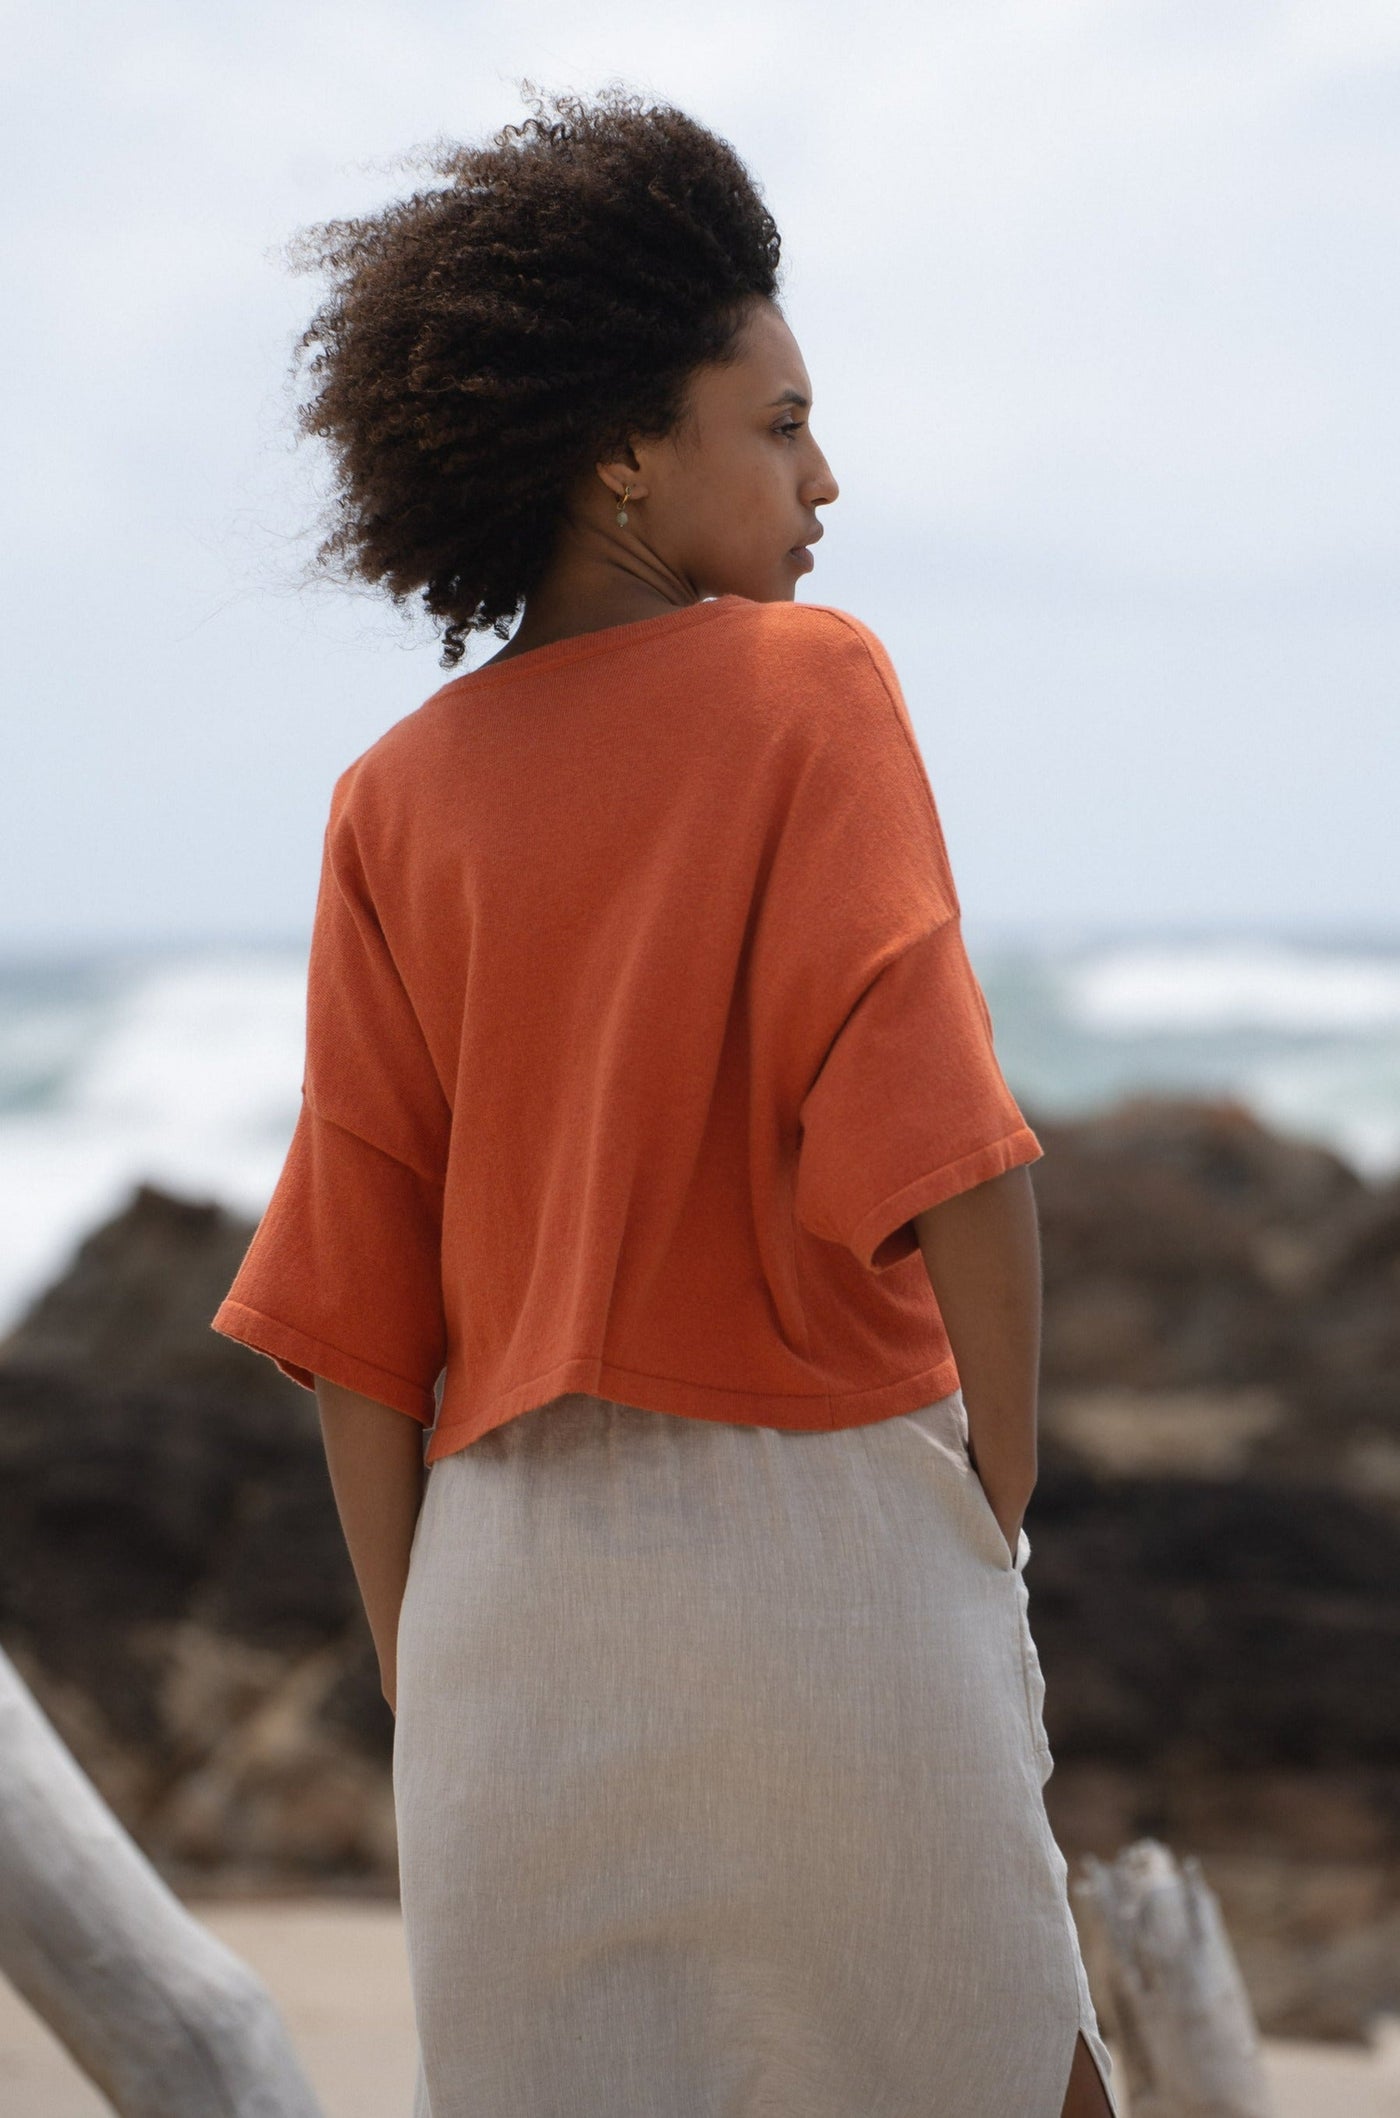 Lilly Pilly Collection Anna Knit top made from Cotton Cashmere in Ginger Marle